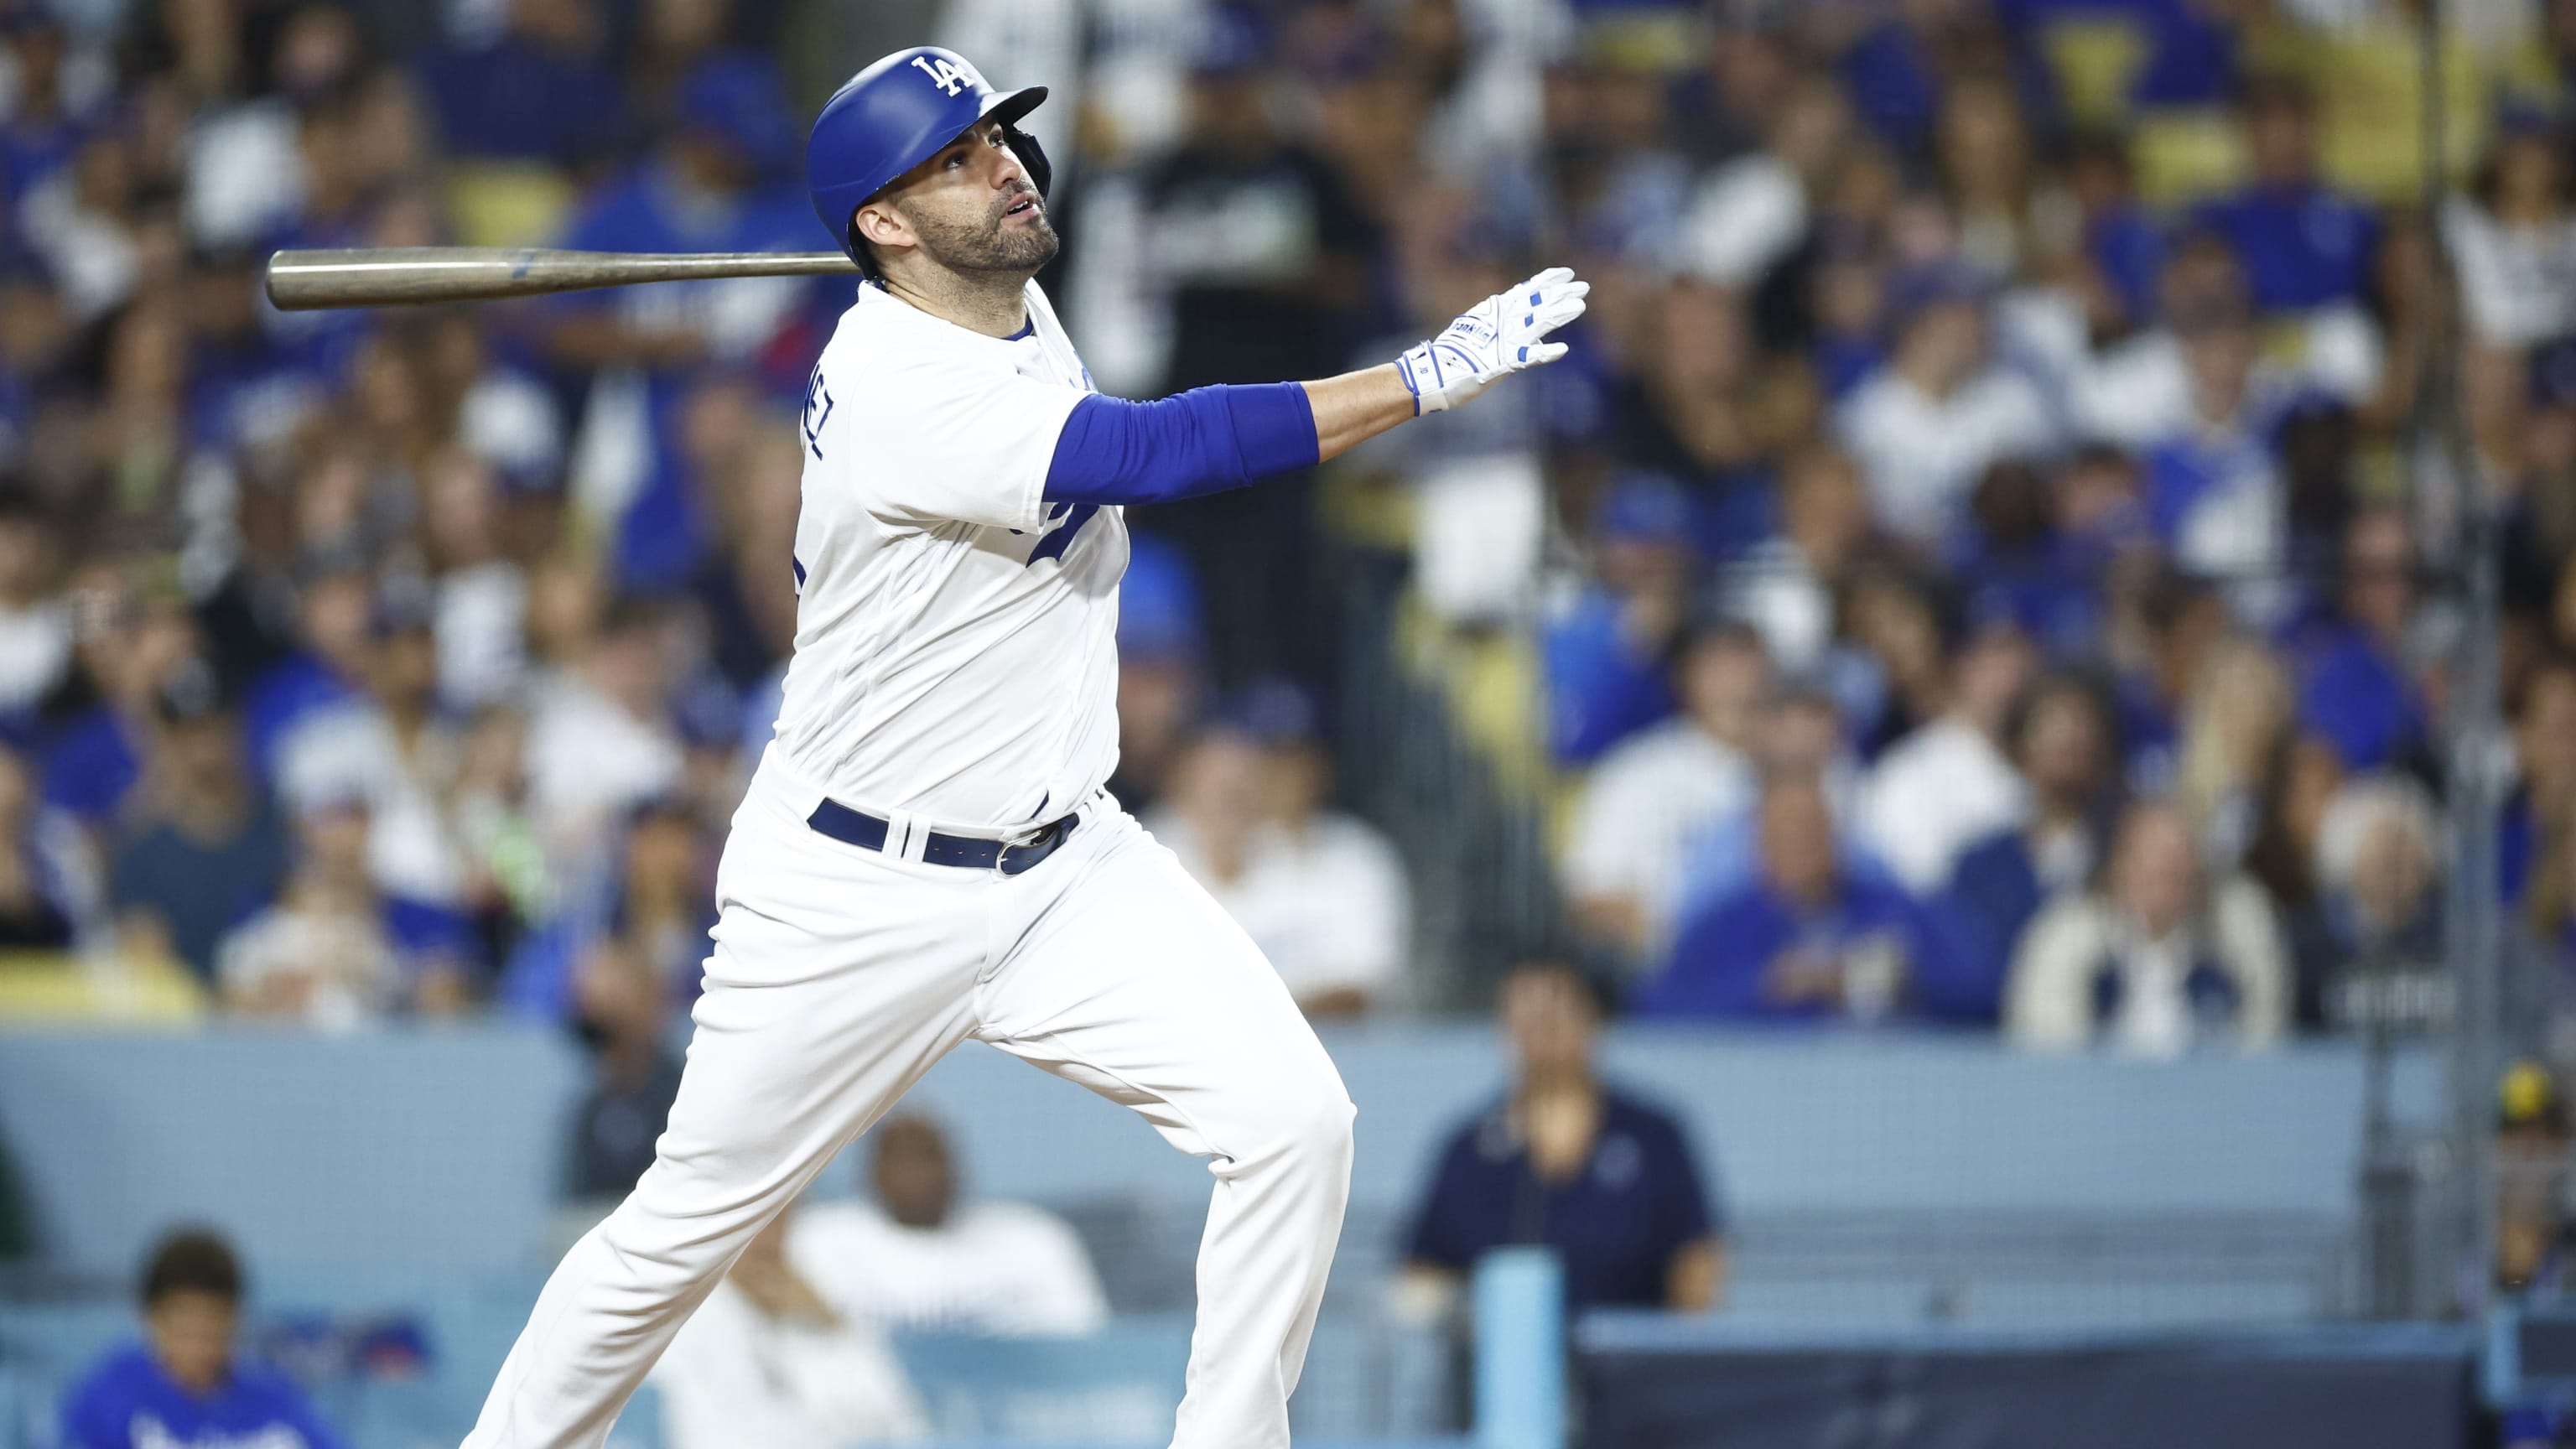 Ousted Dodgers Drive Home Disconnect Between Regular Season and Playoffs